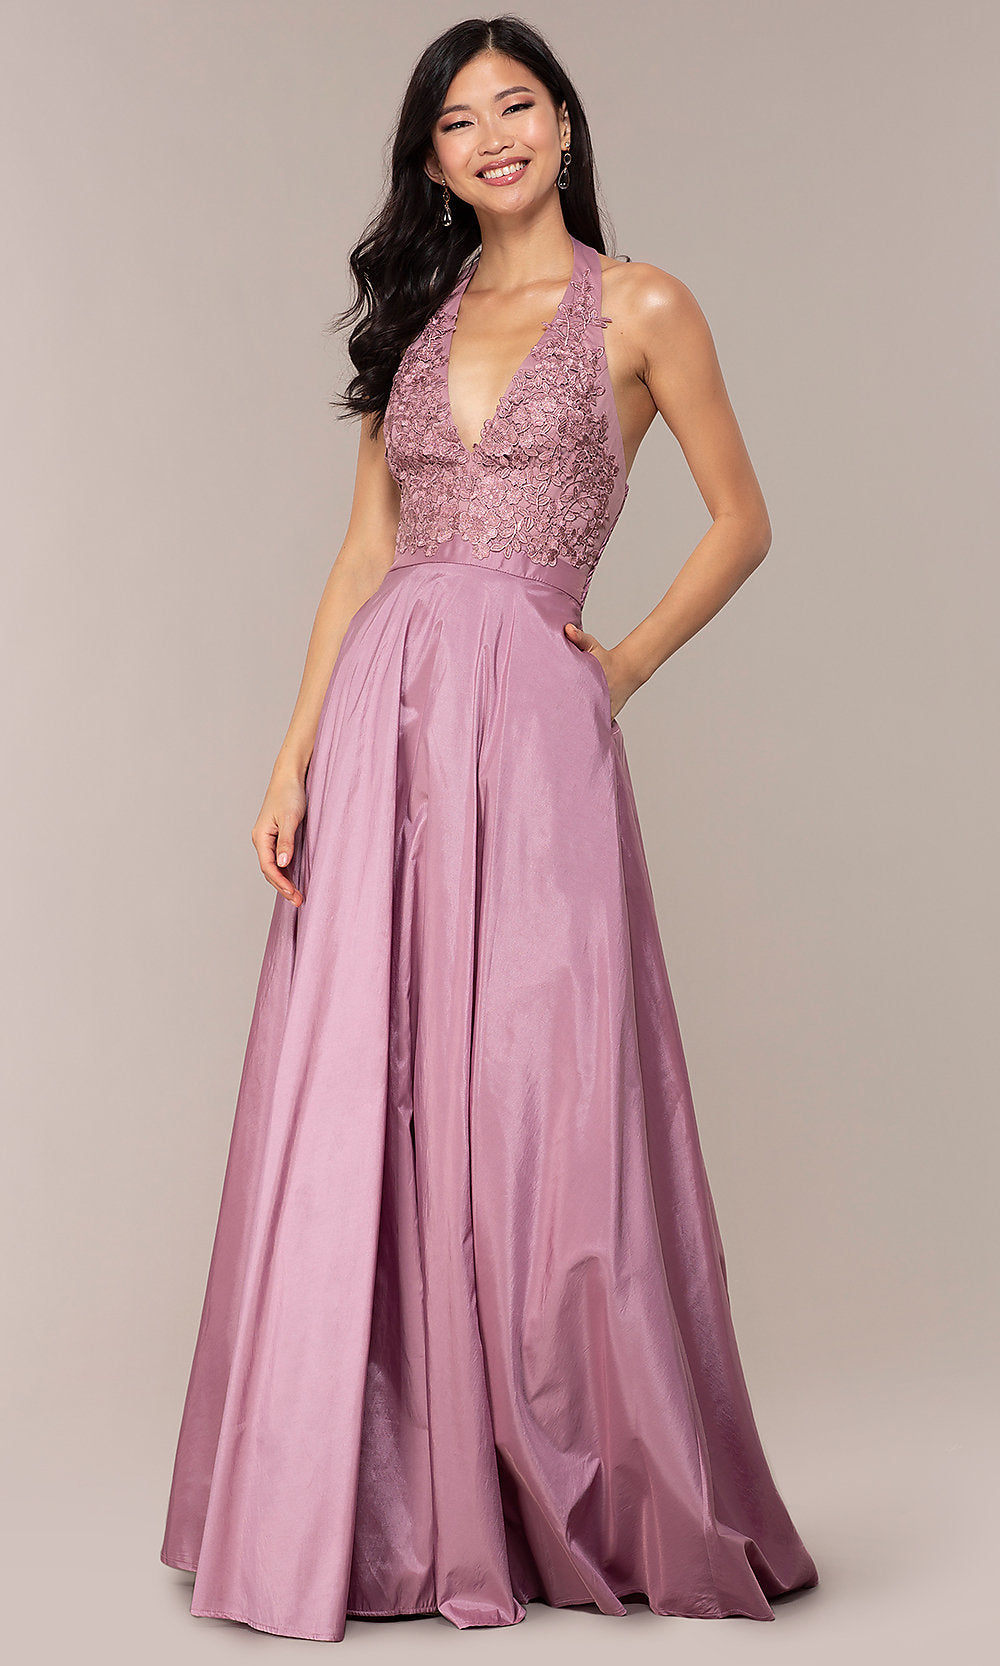  Lace-Bodice Halter Long Prom Dress with Pockets